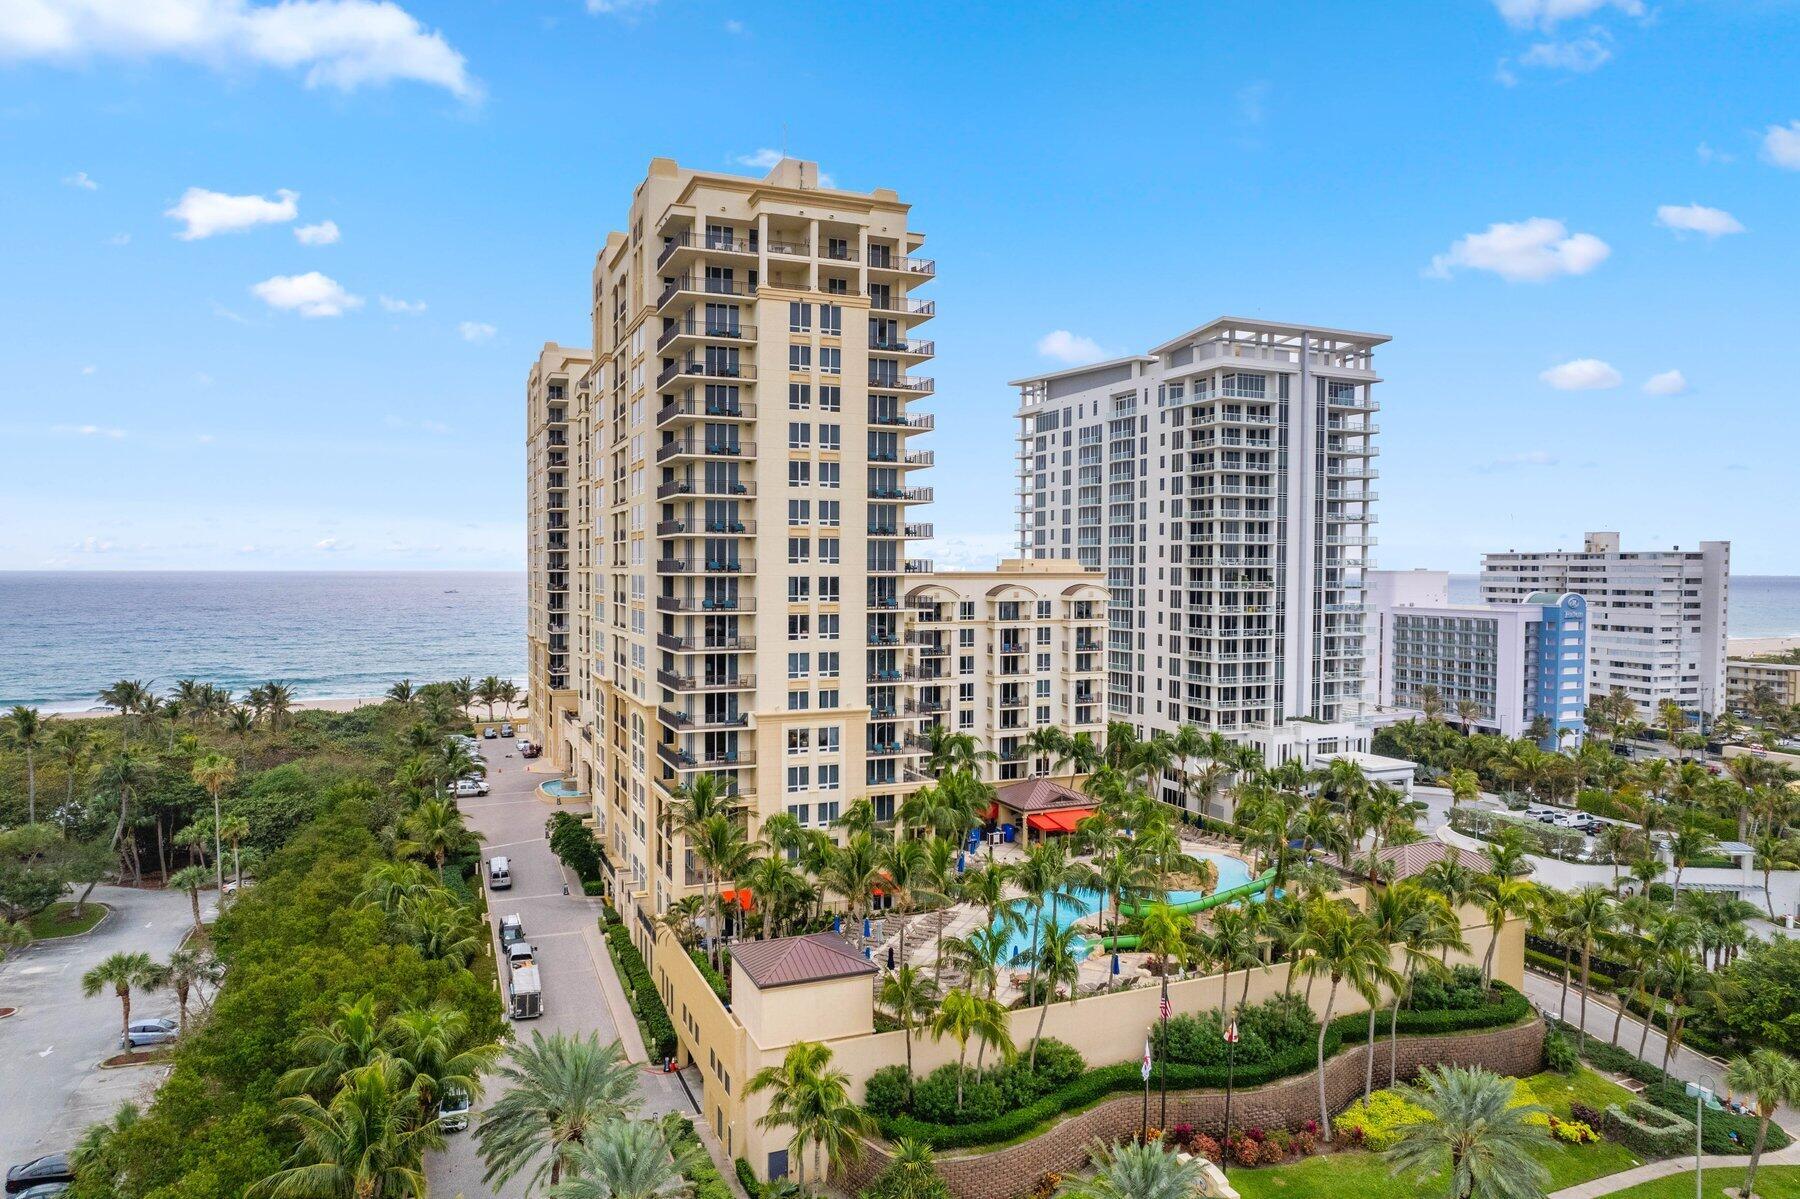 Panoramic and unobstructed views from the ocean, over the beach park to the Intracoastal await you when entering. You will be able to enjoy complete privacy since there are no other buildings close by. This condo is part of the optional Marriott Hotel Program that will provide you with income during the time when you do not use it yourself. As hotel program participant you may use the condo up to 8 weeks per year yourself. Enjoy the hotel amenities, the on-site spa, restaurants, concierge service and receive a 20% discount on most services. Parking is via valet ,1 car per unit is free of charge.  The perfect vacation home that works for you!